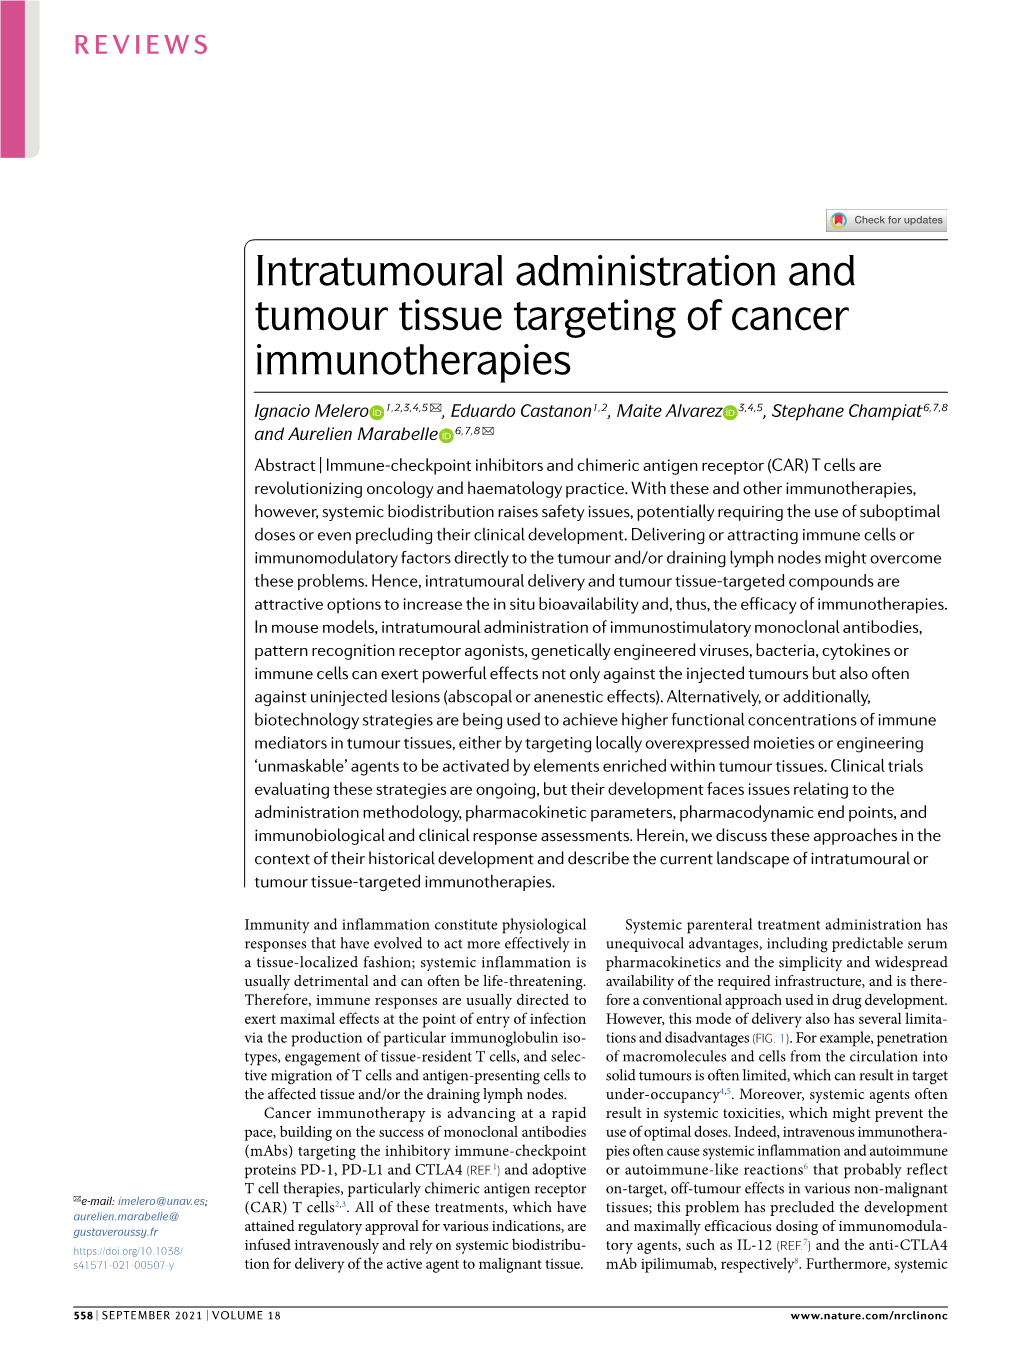 Intratumoural Administration and Tumour Tissue Targeting of Cancer Immunotherapies